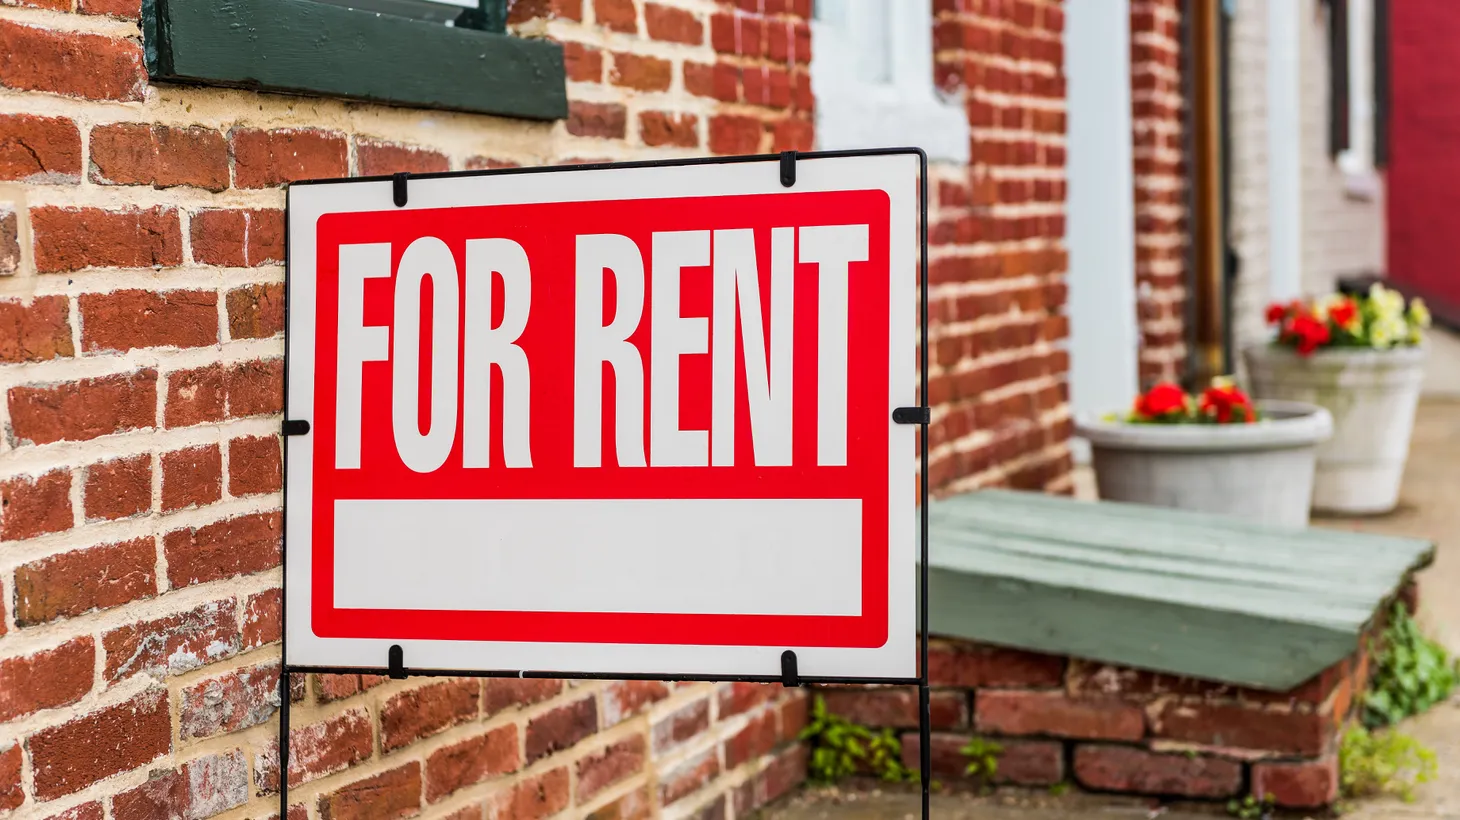 A “for rent” sign is erected in front of a brick building.